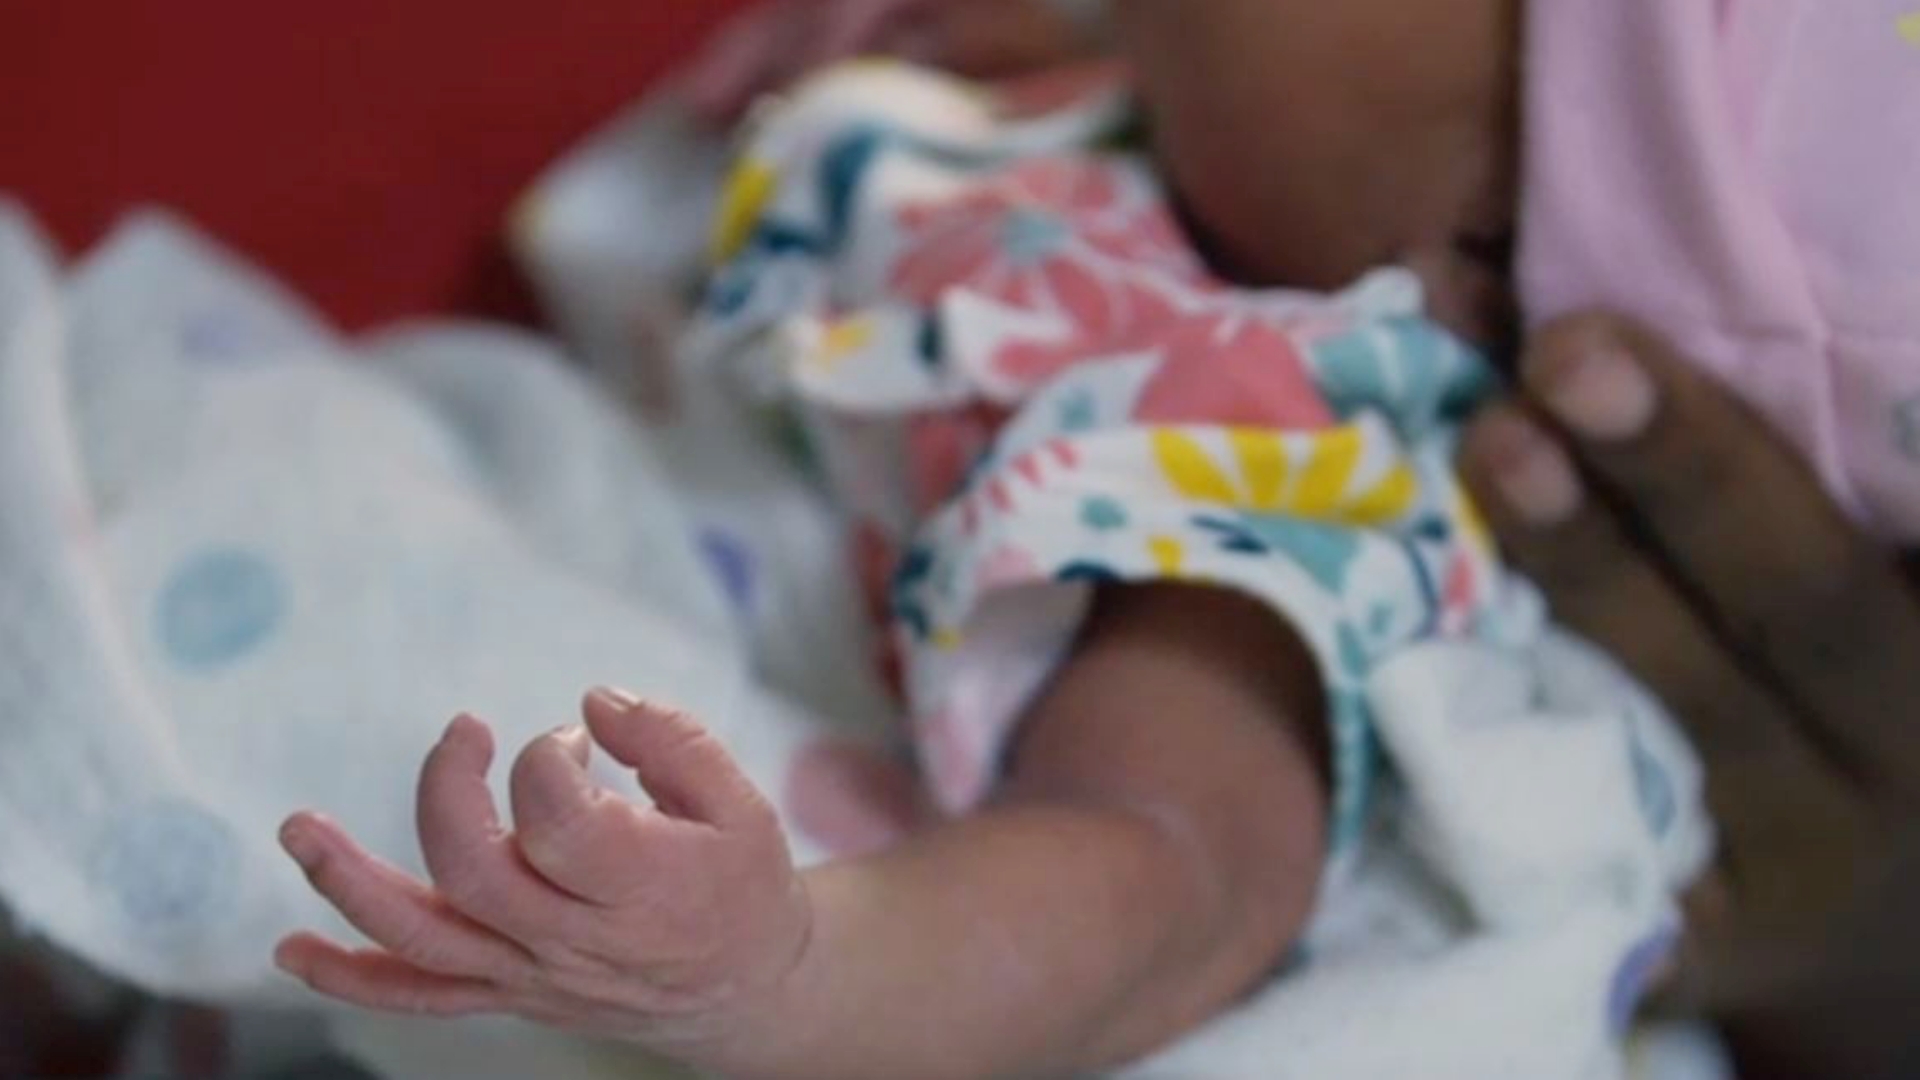 New data shows that one of the most effective methods we can treat babies born with opioid exposure isn’t through medications or long hospital stays, but through lots of cuddles and time with mom. 